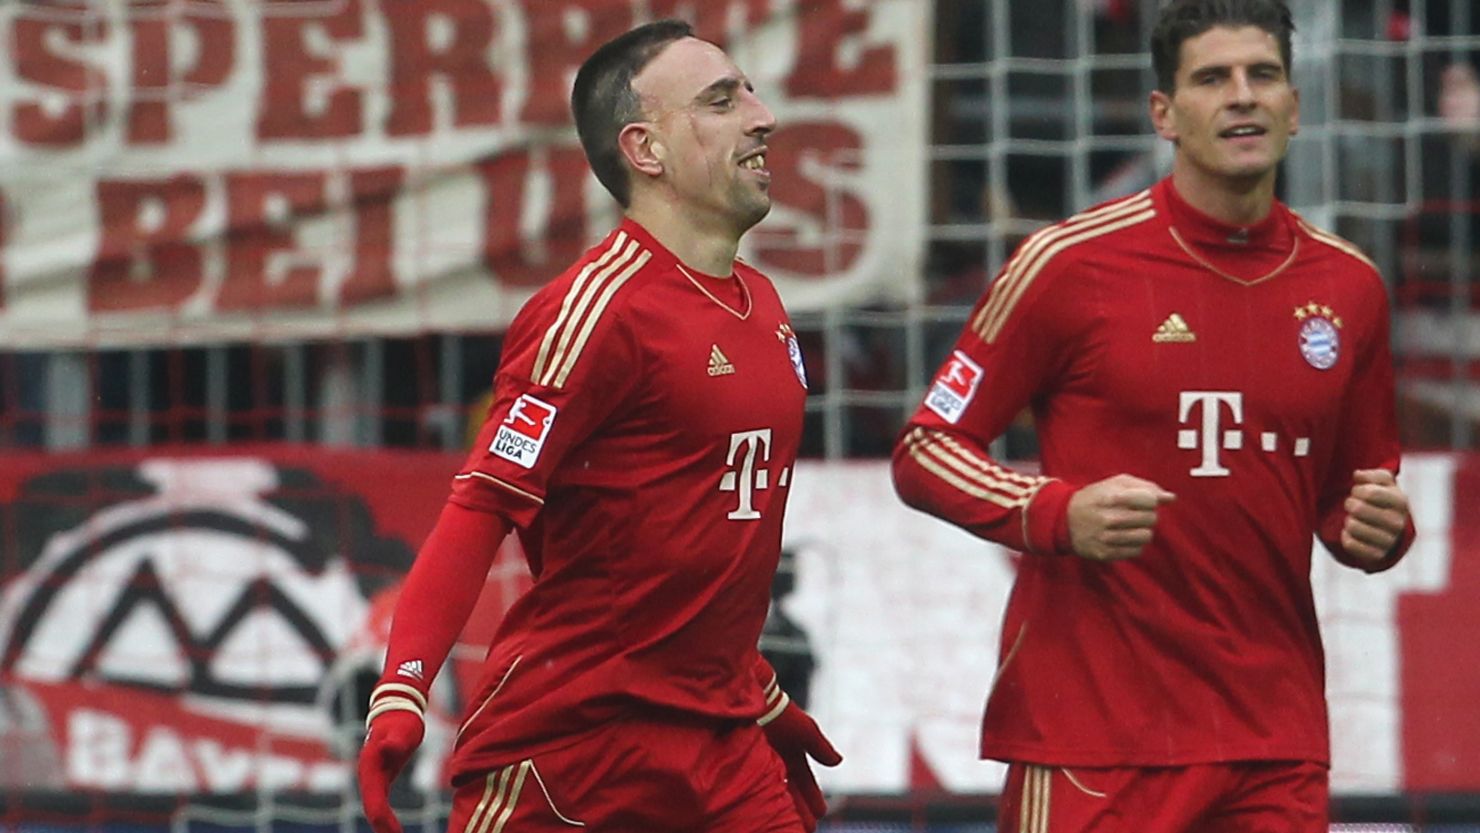 Franck Ribery celebrates with Bayern Munich teammate Mario Gomez after scoring his second goal against Schalke.